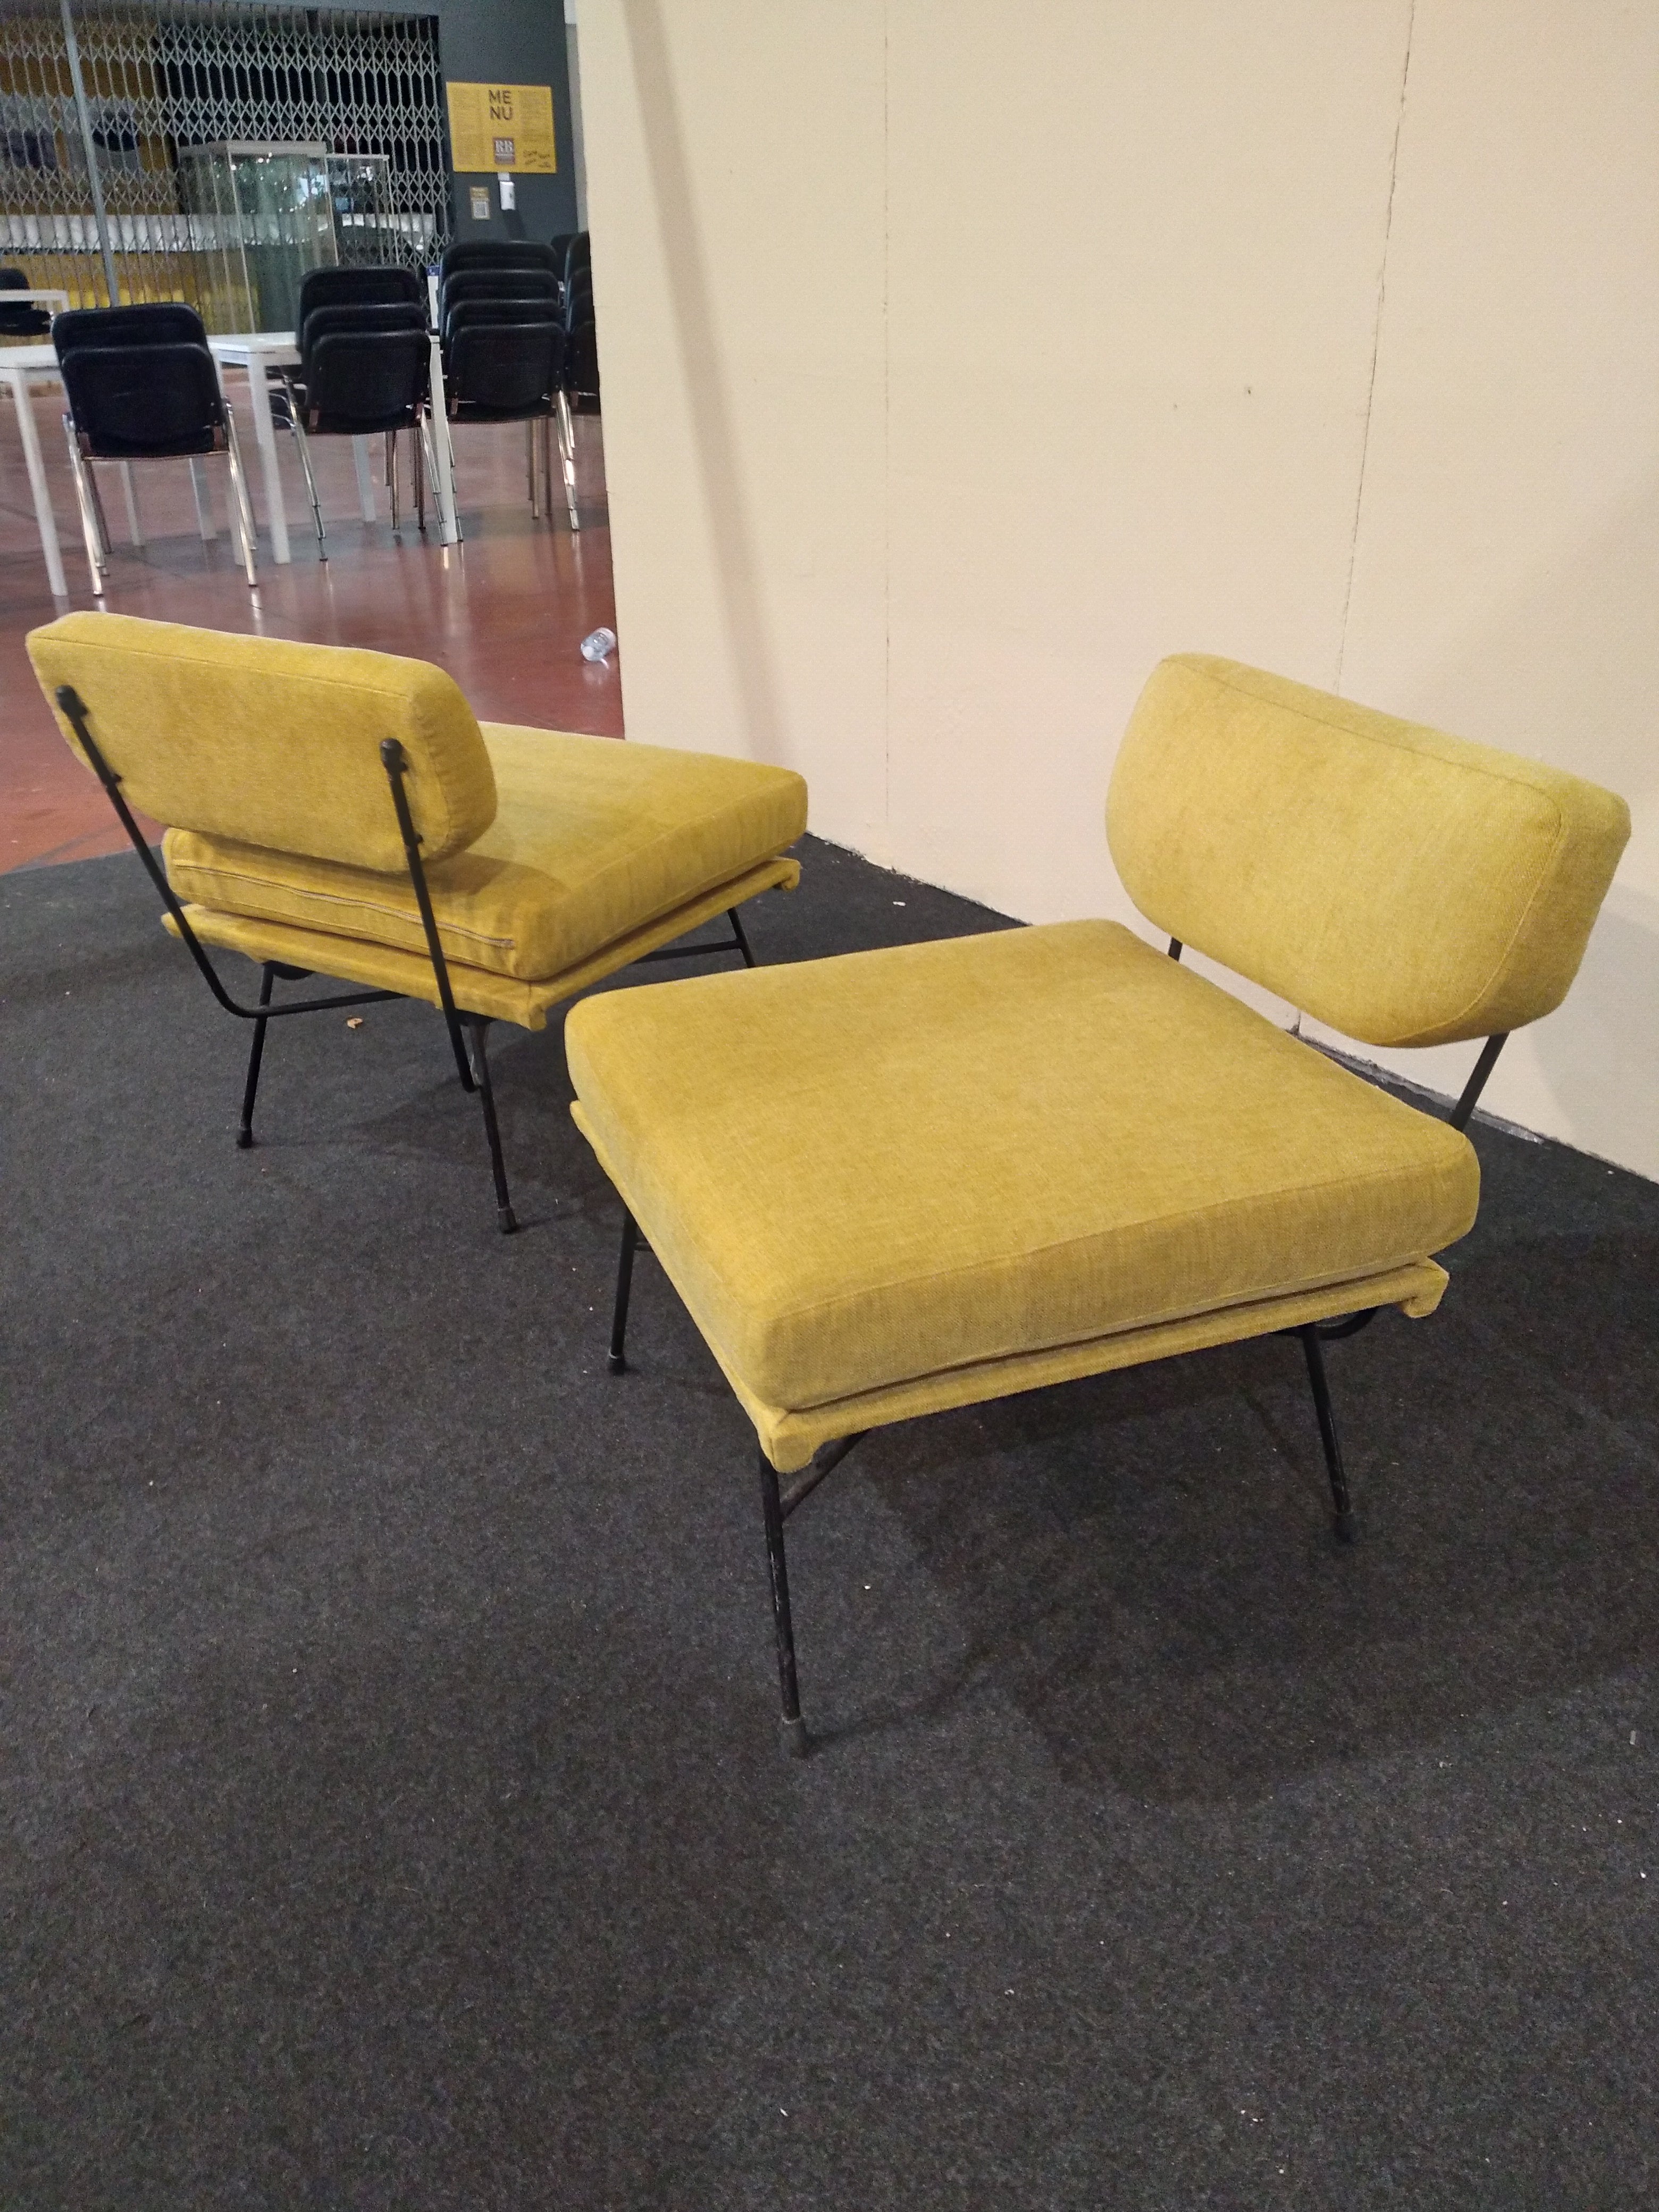 Pair of  Elettra armchairs by BBPR Studio from Arflex Italy 1956s, original and first Edition. 
fabric is original, original label :ARFLEX. The Elettra armchairs are the iconic piece of Italian Design by BBPR Studio is important pieces 
I am